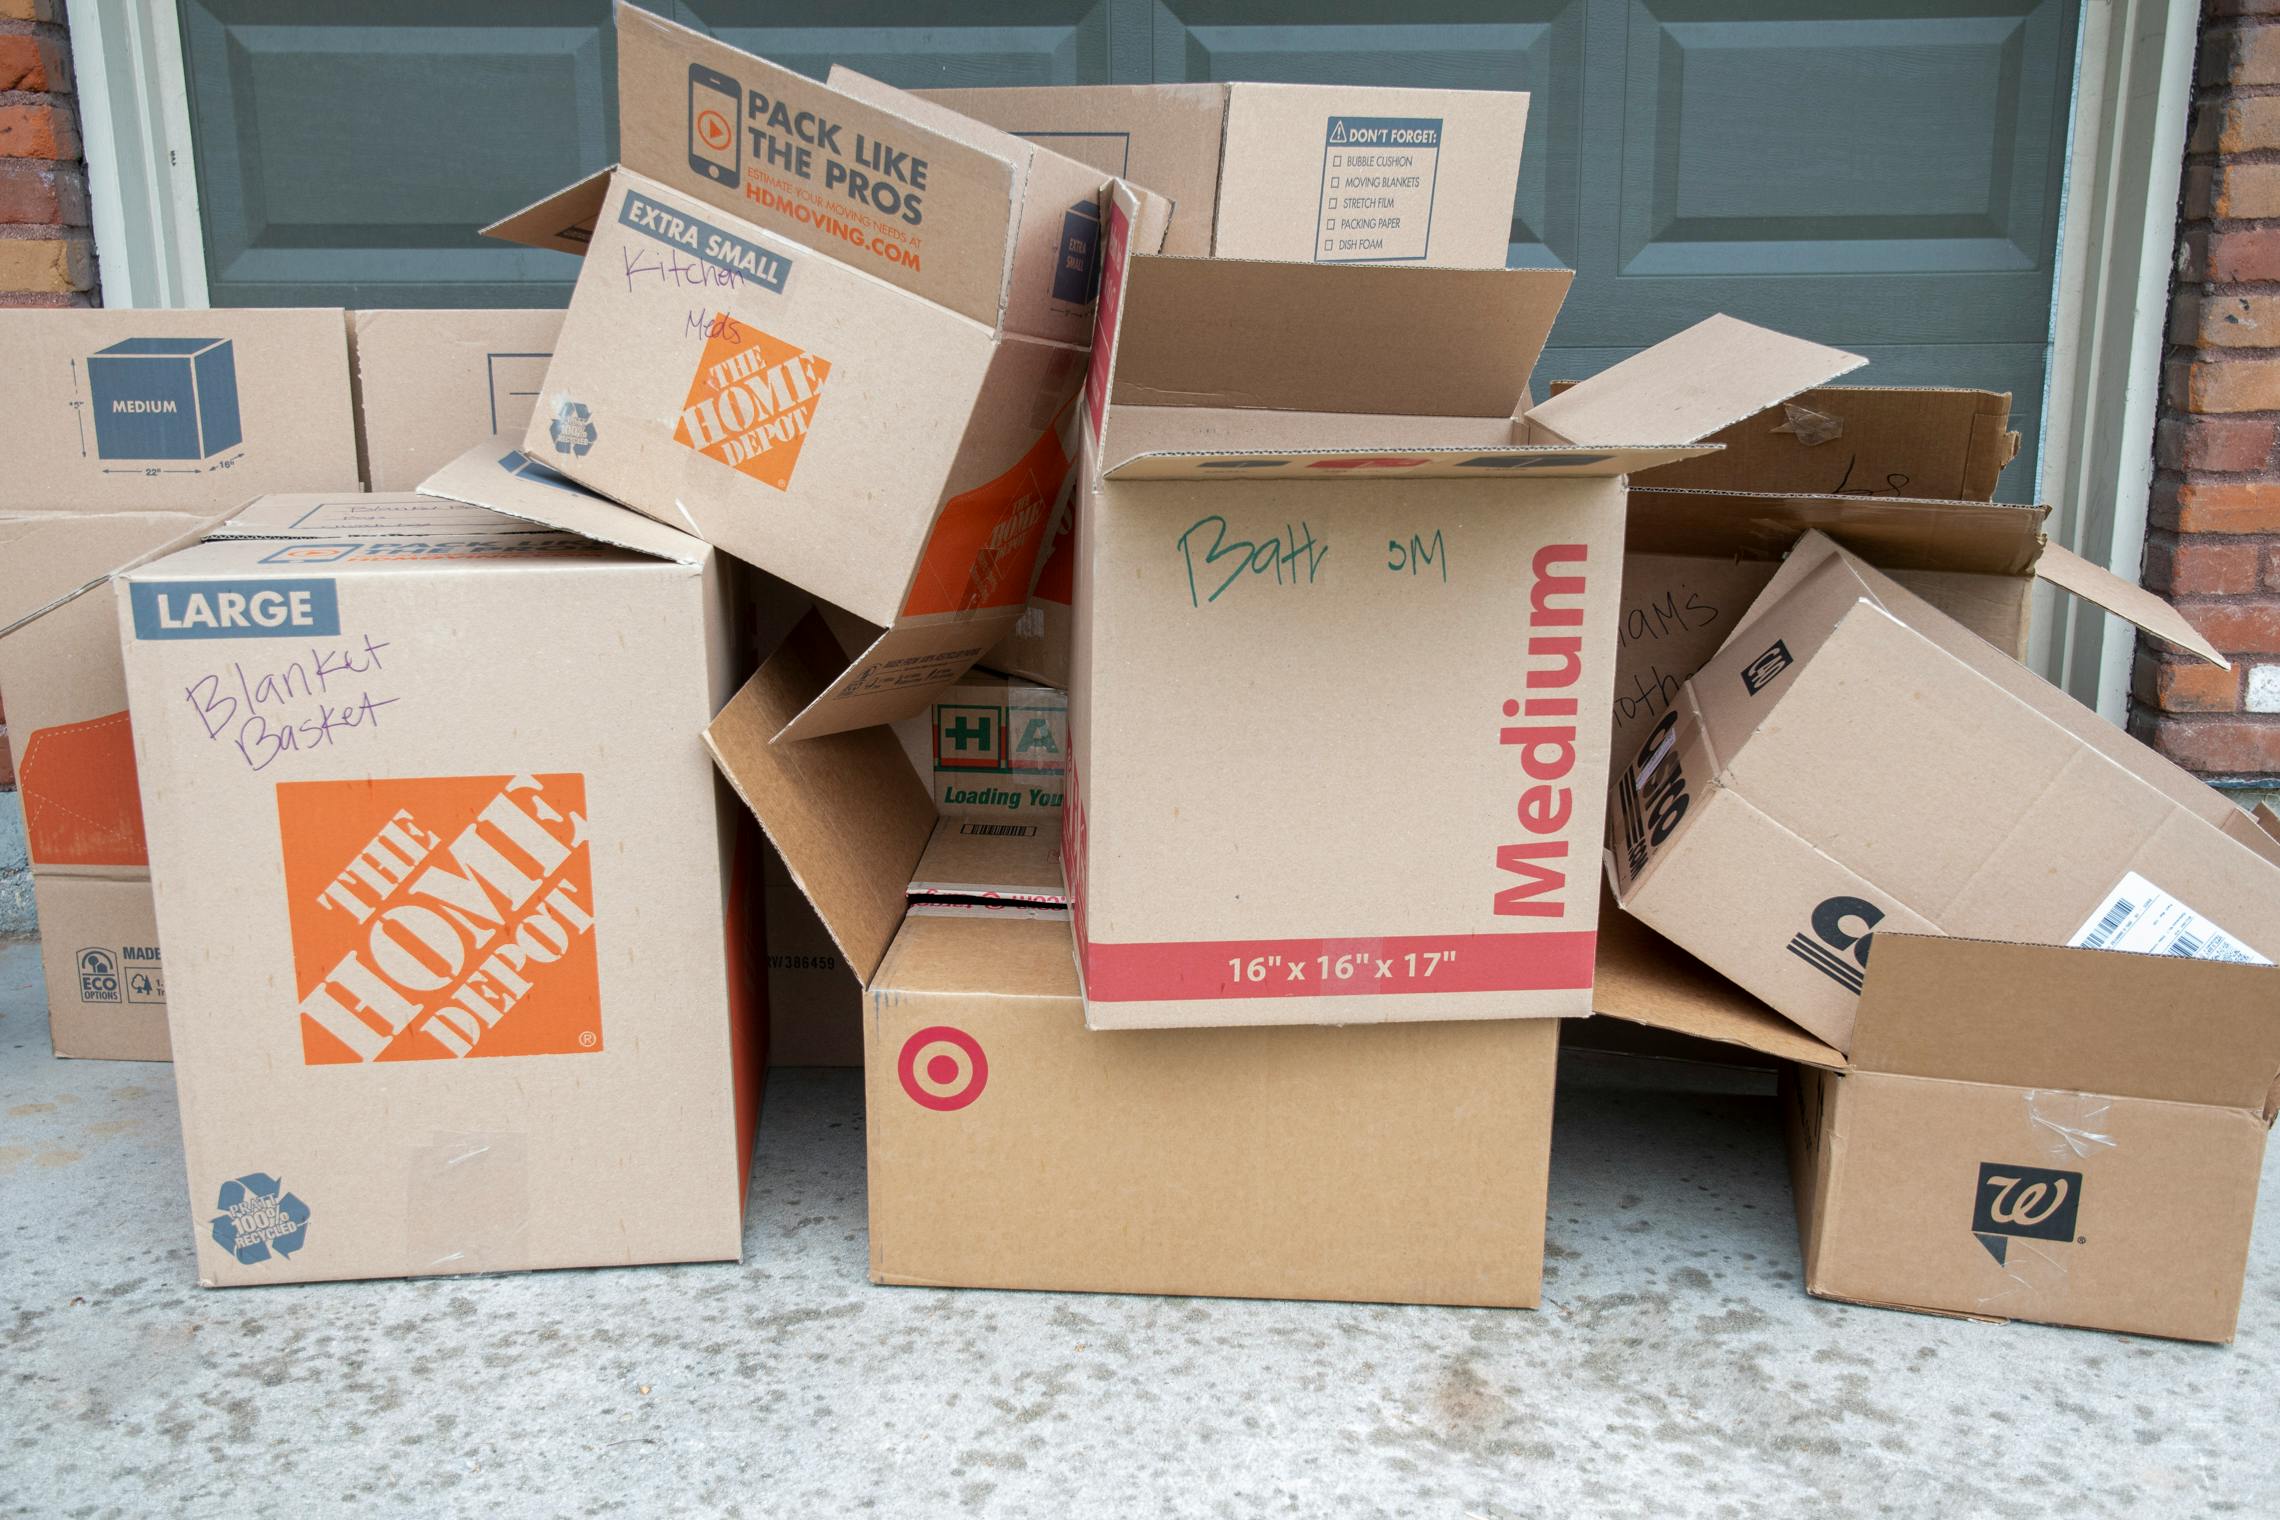 7 Places to Find Free Moving Boxes [2023] - Neighbor Blog